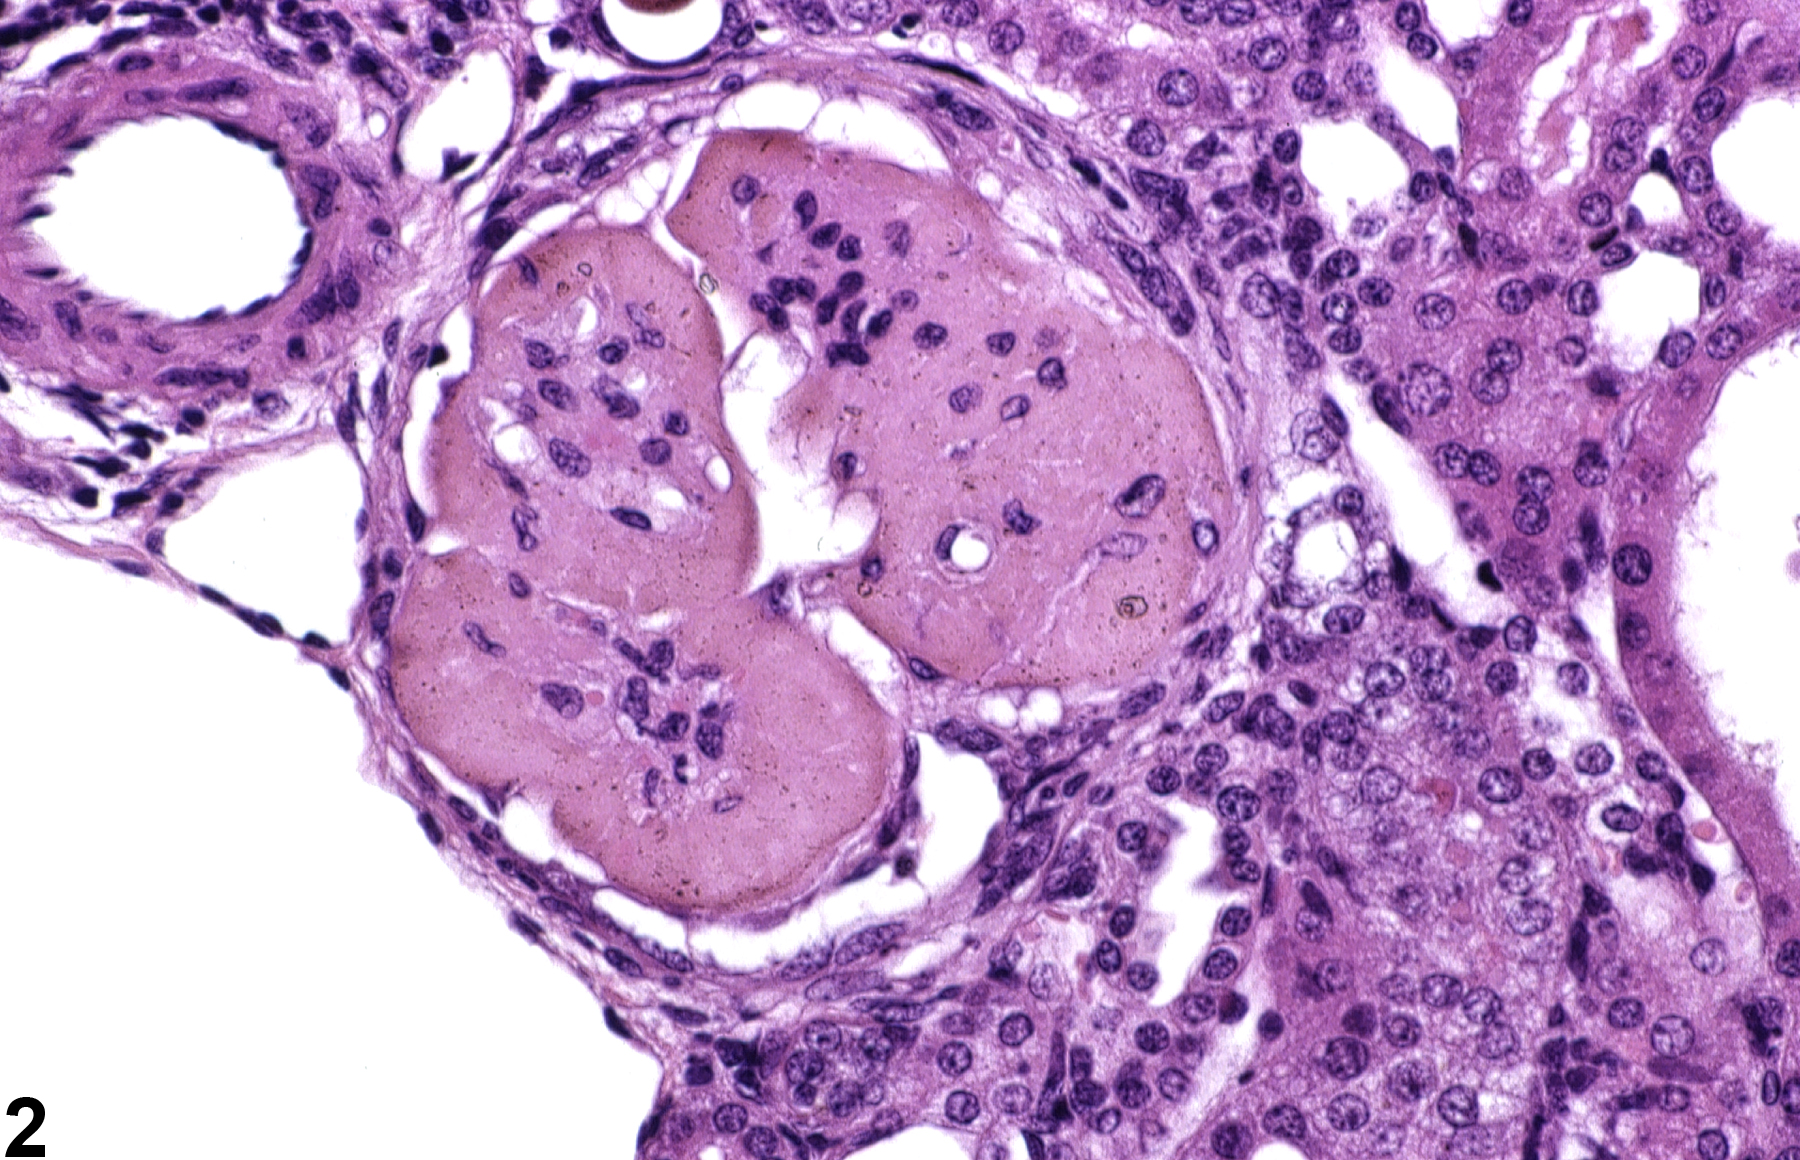 Image of hyaline glomerulopathy in the kidney from a female B6C3F1 mouse in a chronic study